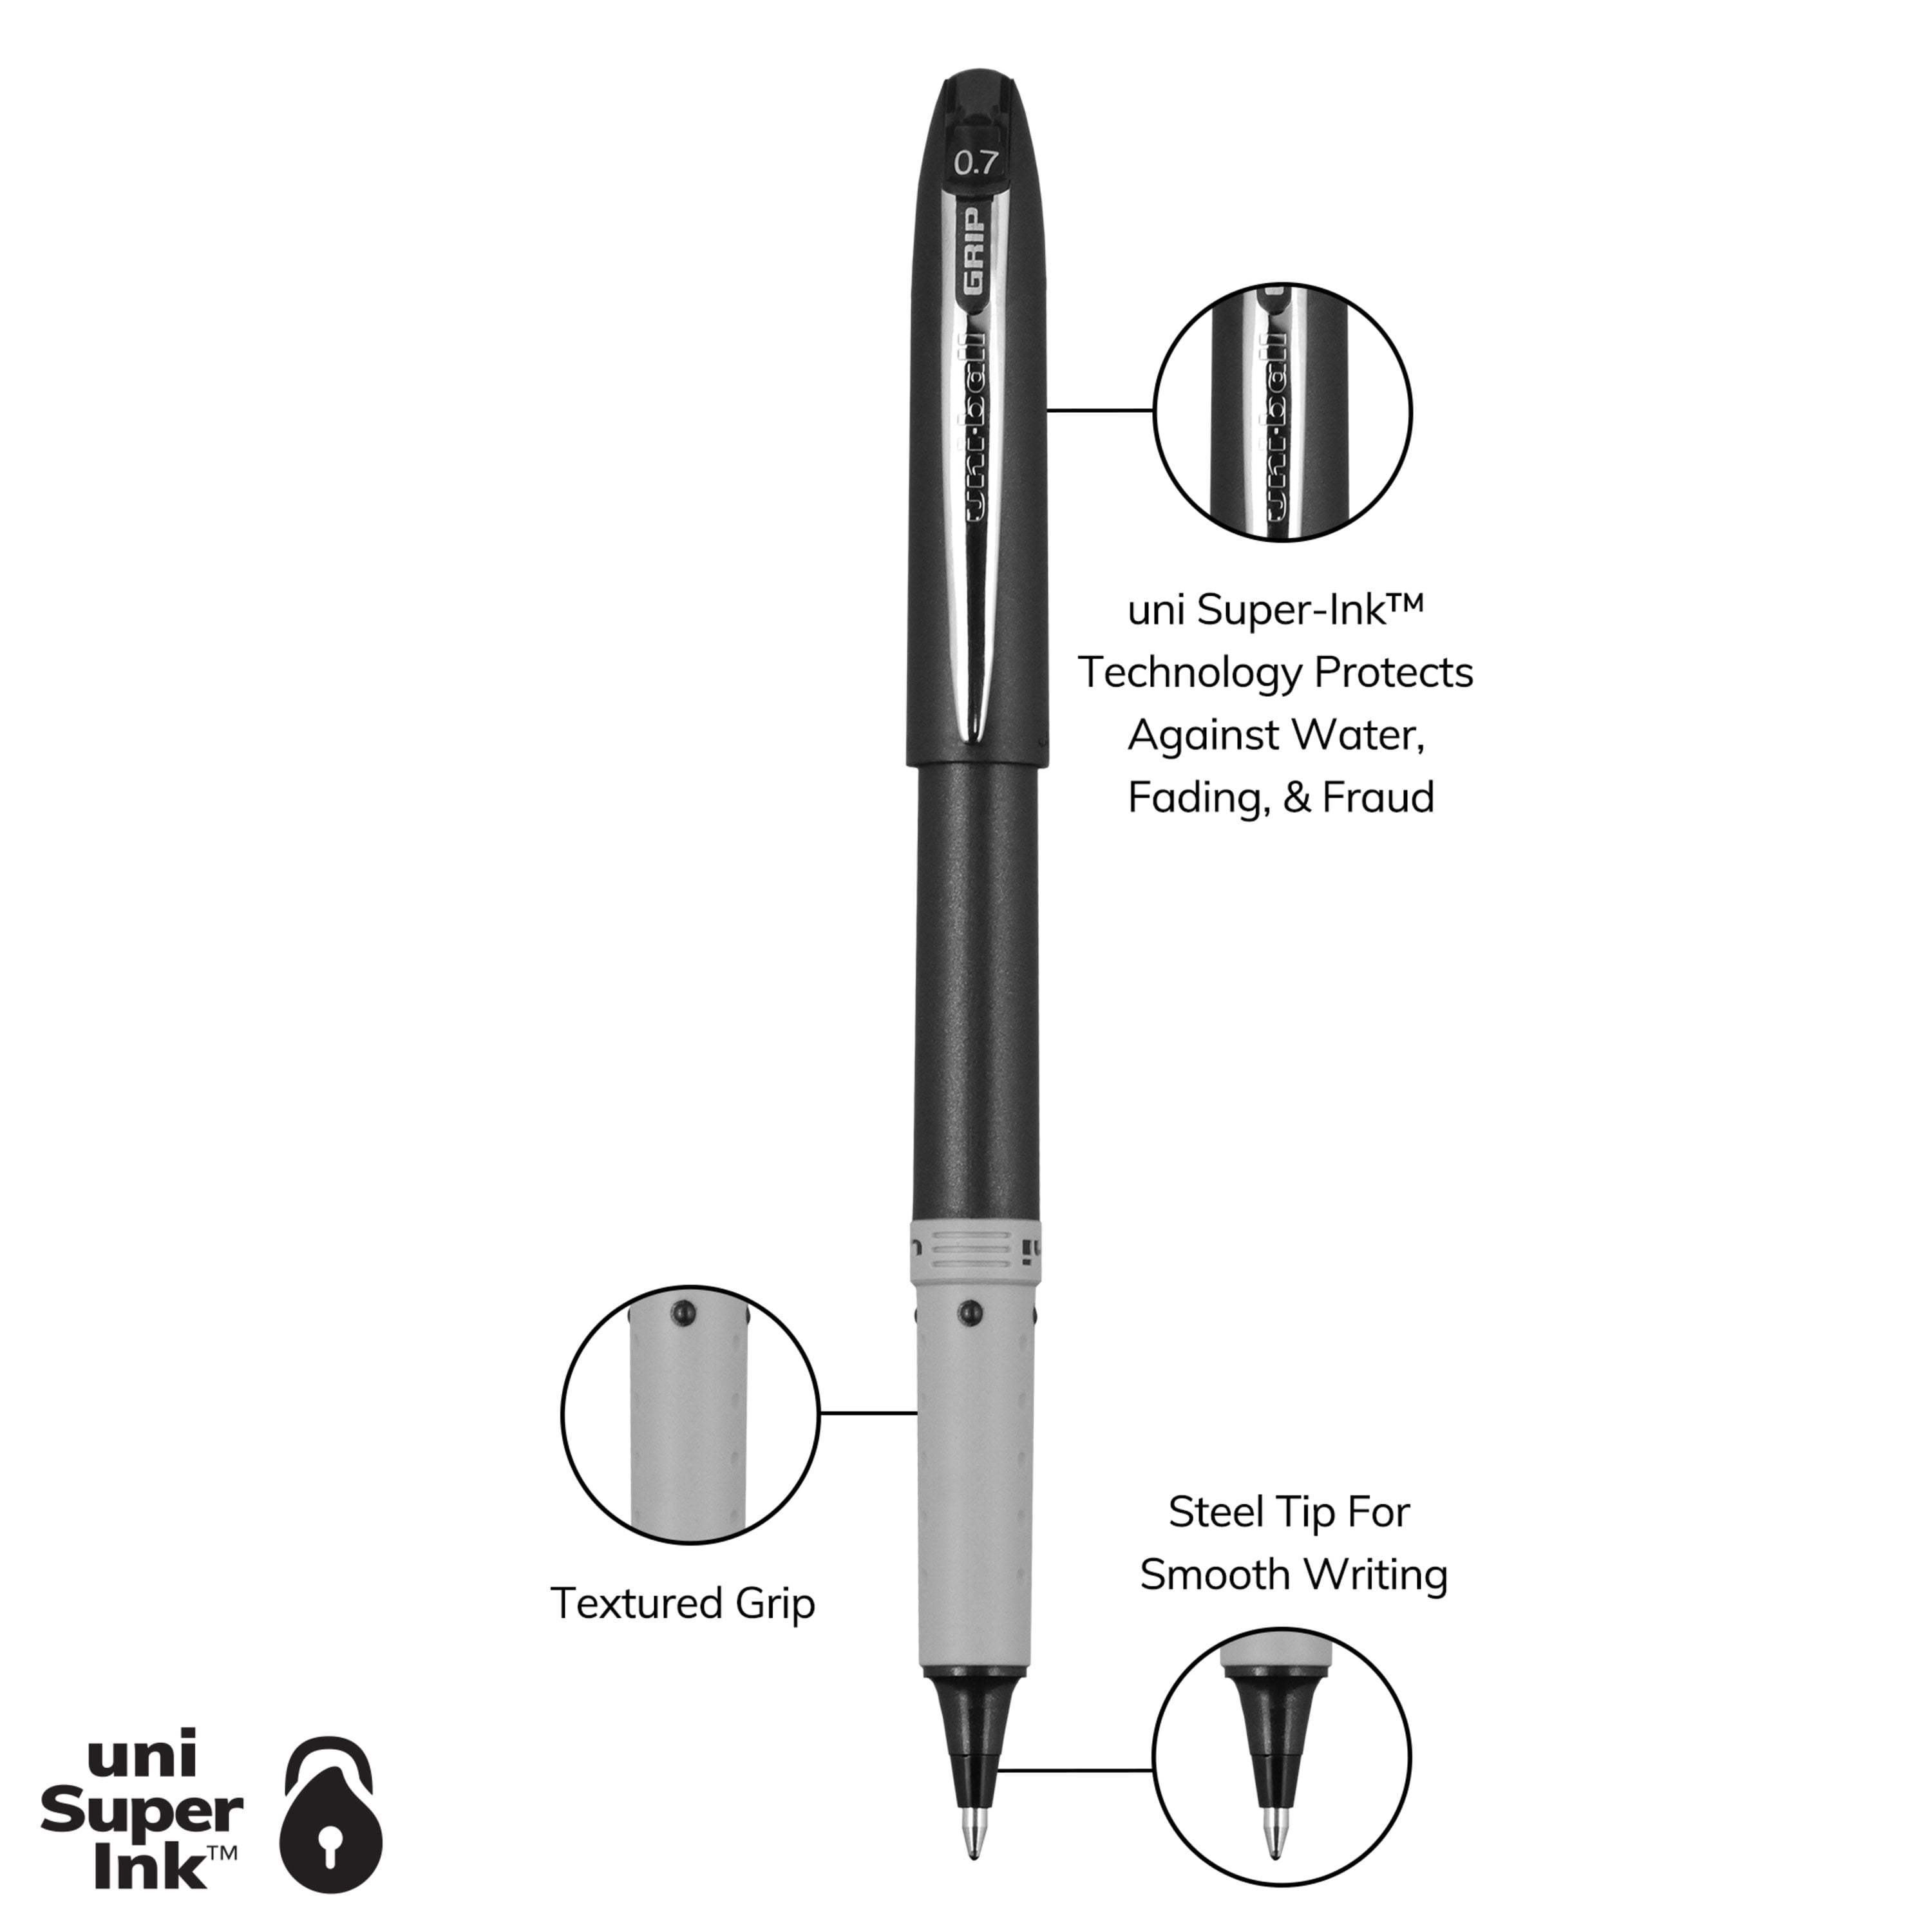 MR-Conditional Roller Ball Pens